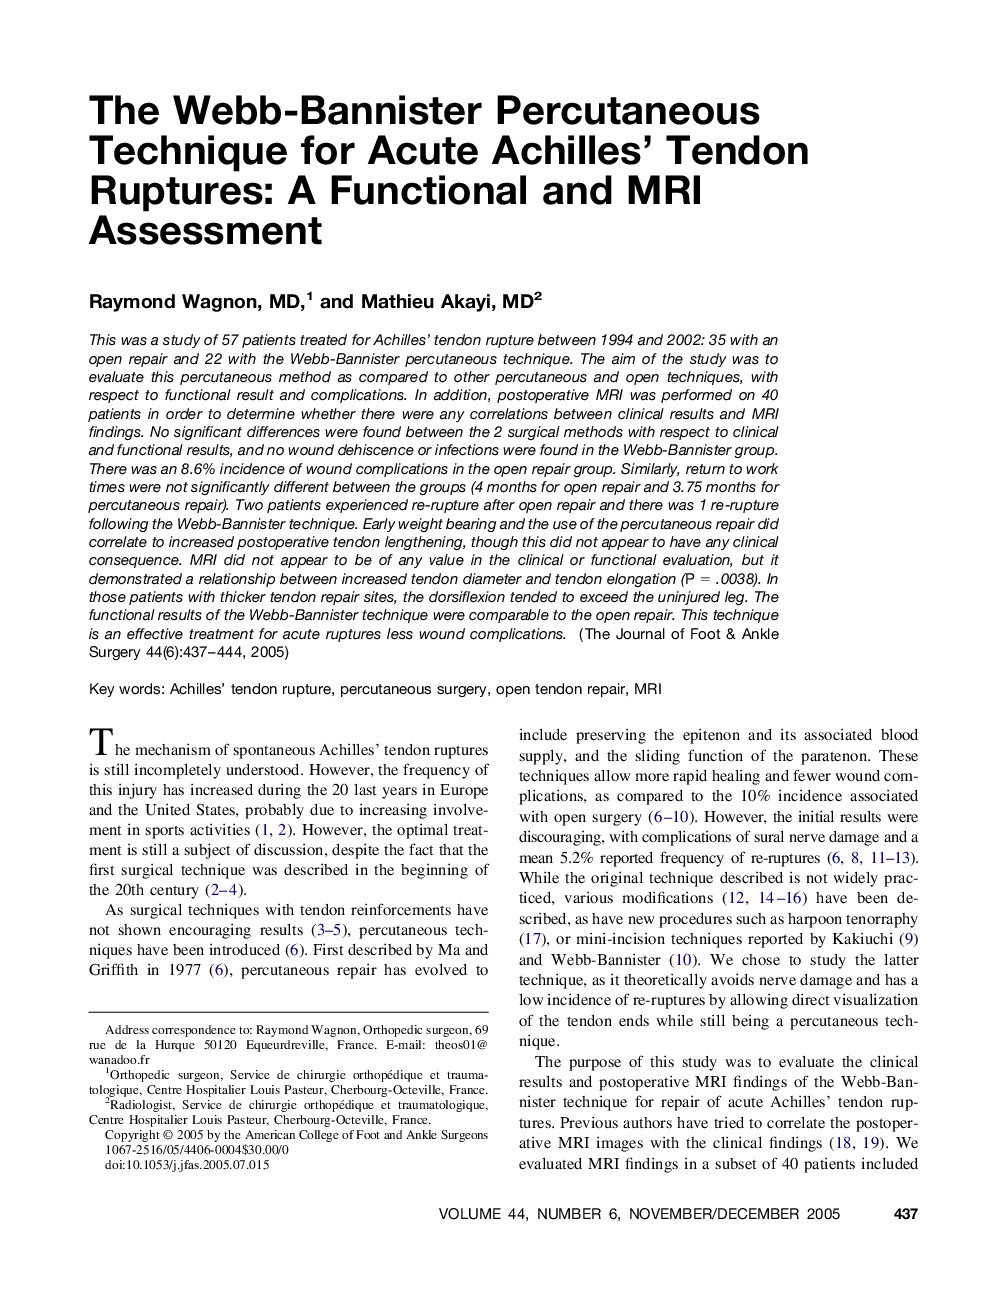 The Webb-Bannister Percutaneous Technique for Acute Achilles' Tendon Ruptures: A Functional and MRI Assessment